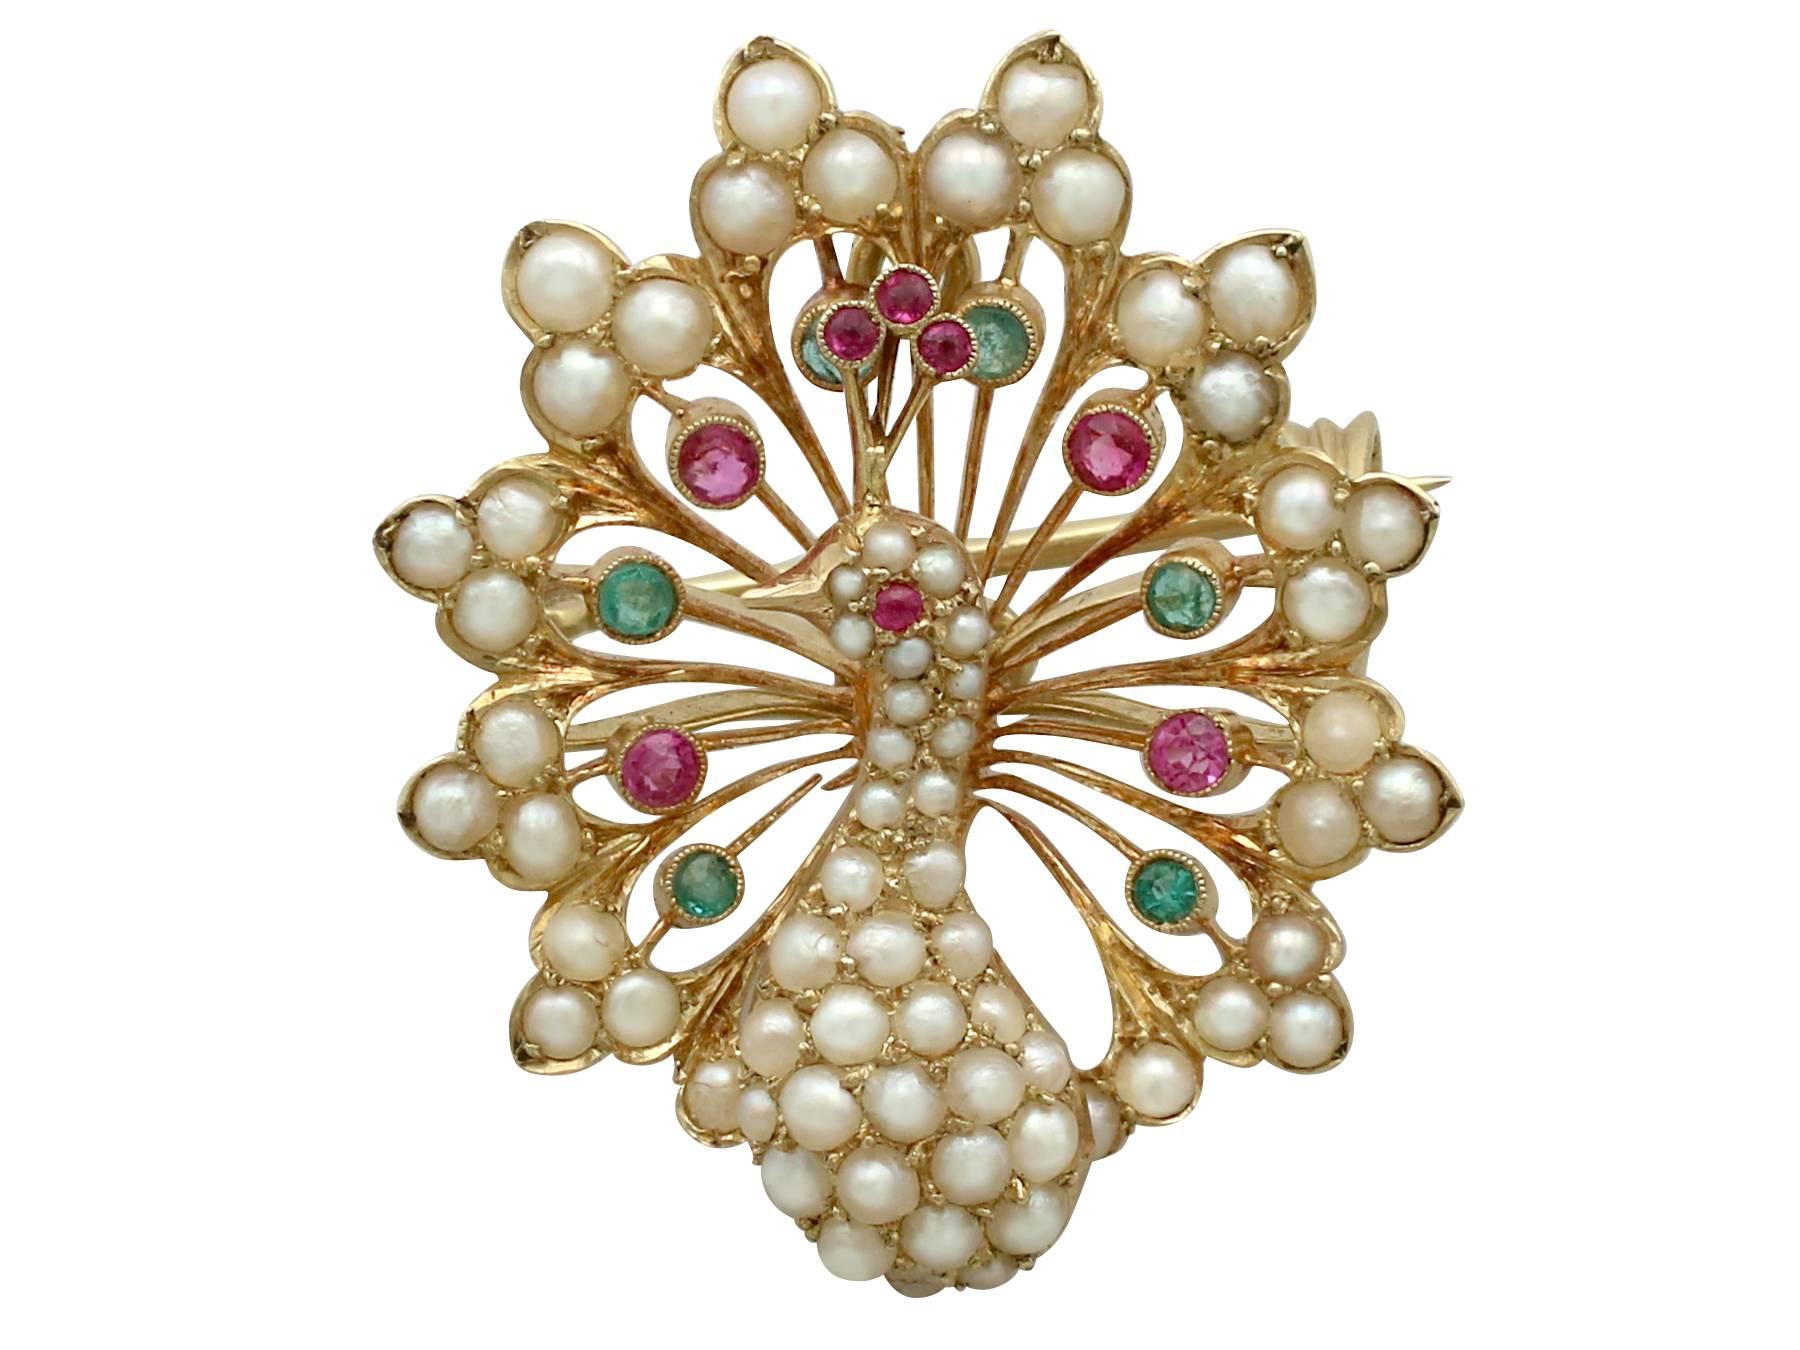 A stunning antique Victorian 0.36 carat ruby and emerald, seed pearl and 18 karat yellow gold 'peacock' brooch; part of our diverse antique jewelry collections

This stunning, fine and impressive peacock pendant has been crafted in 18k yellow